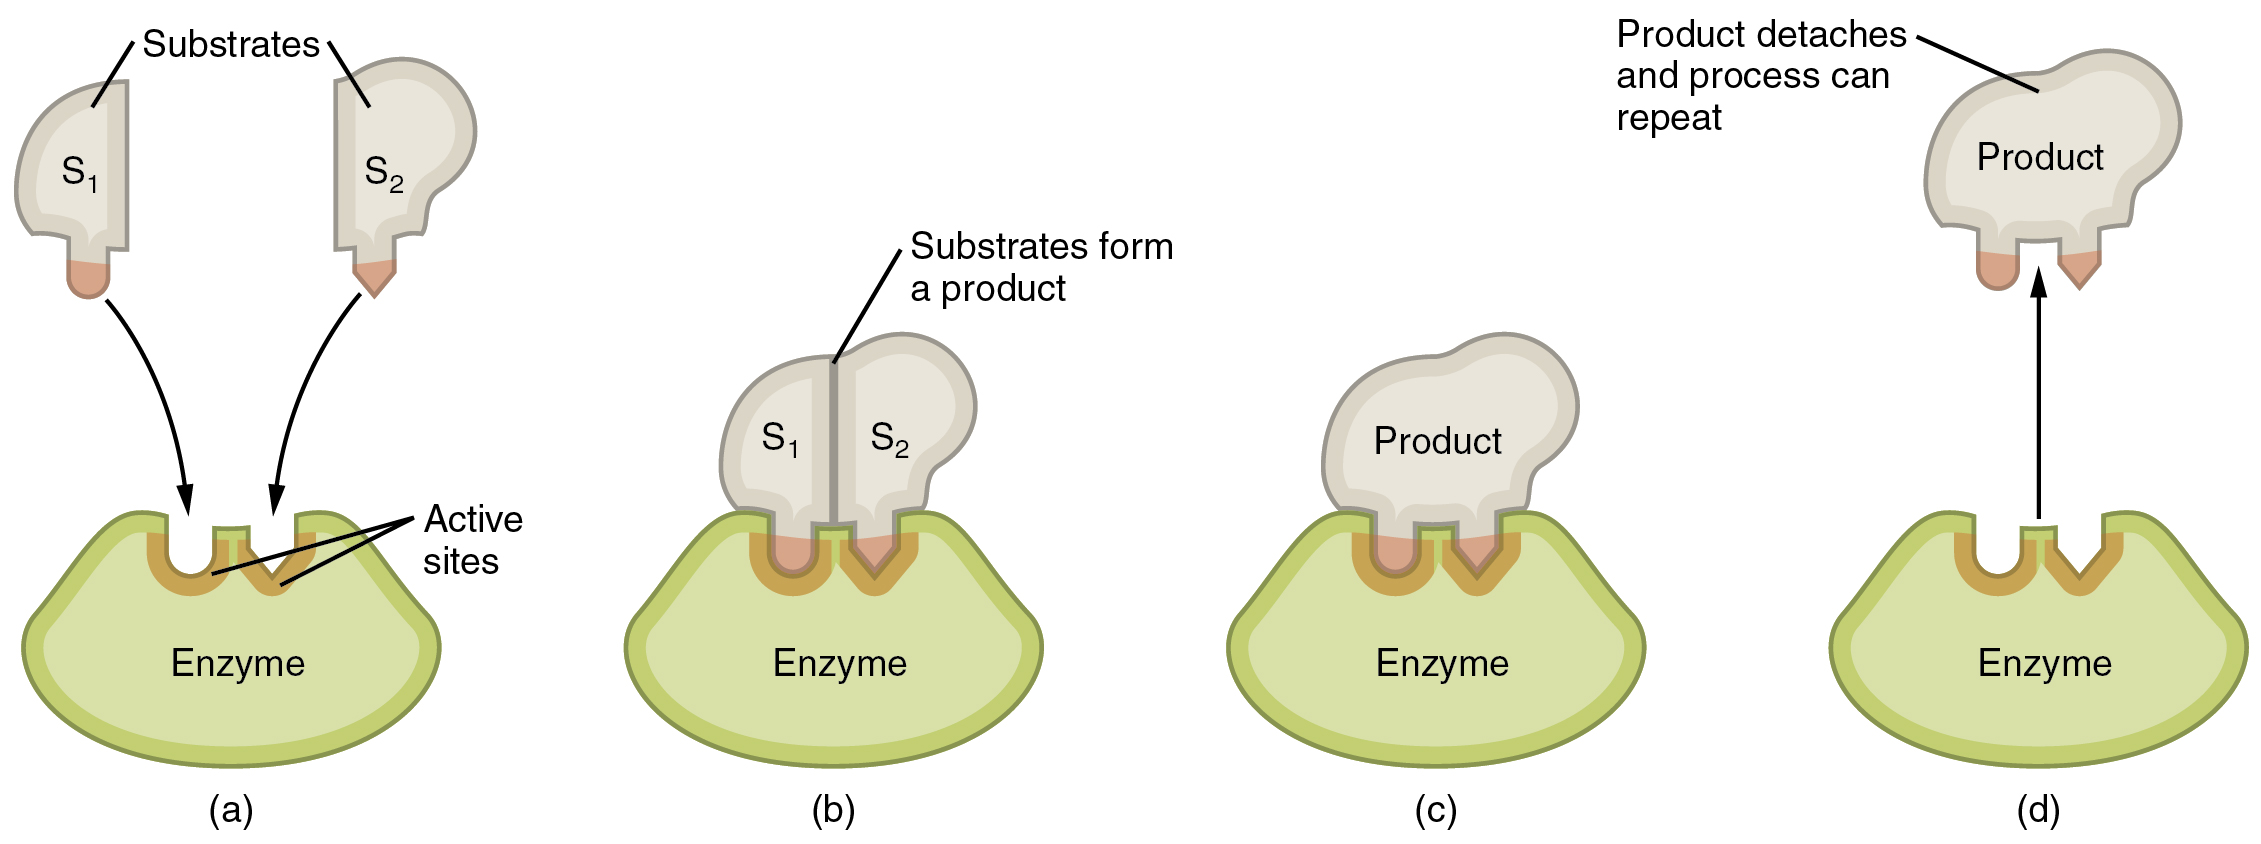 Enzymatic reaction between enzyme and substrates, described in the caption.